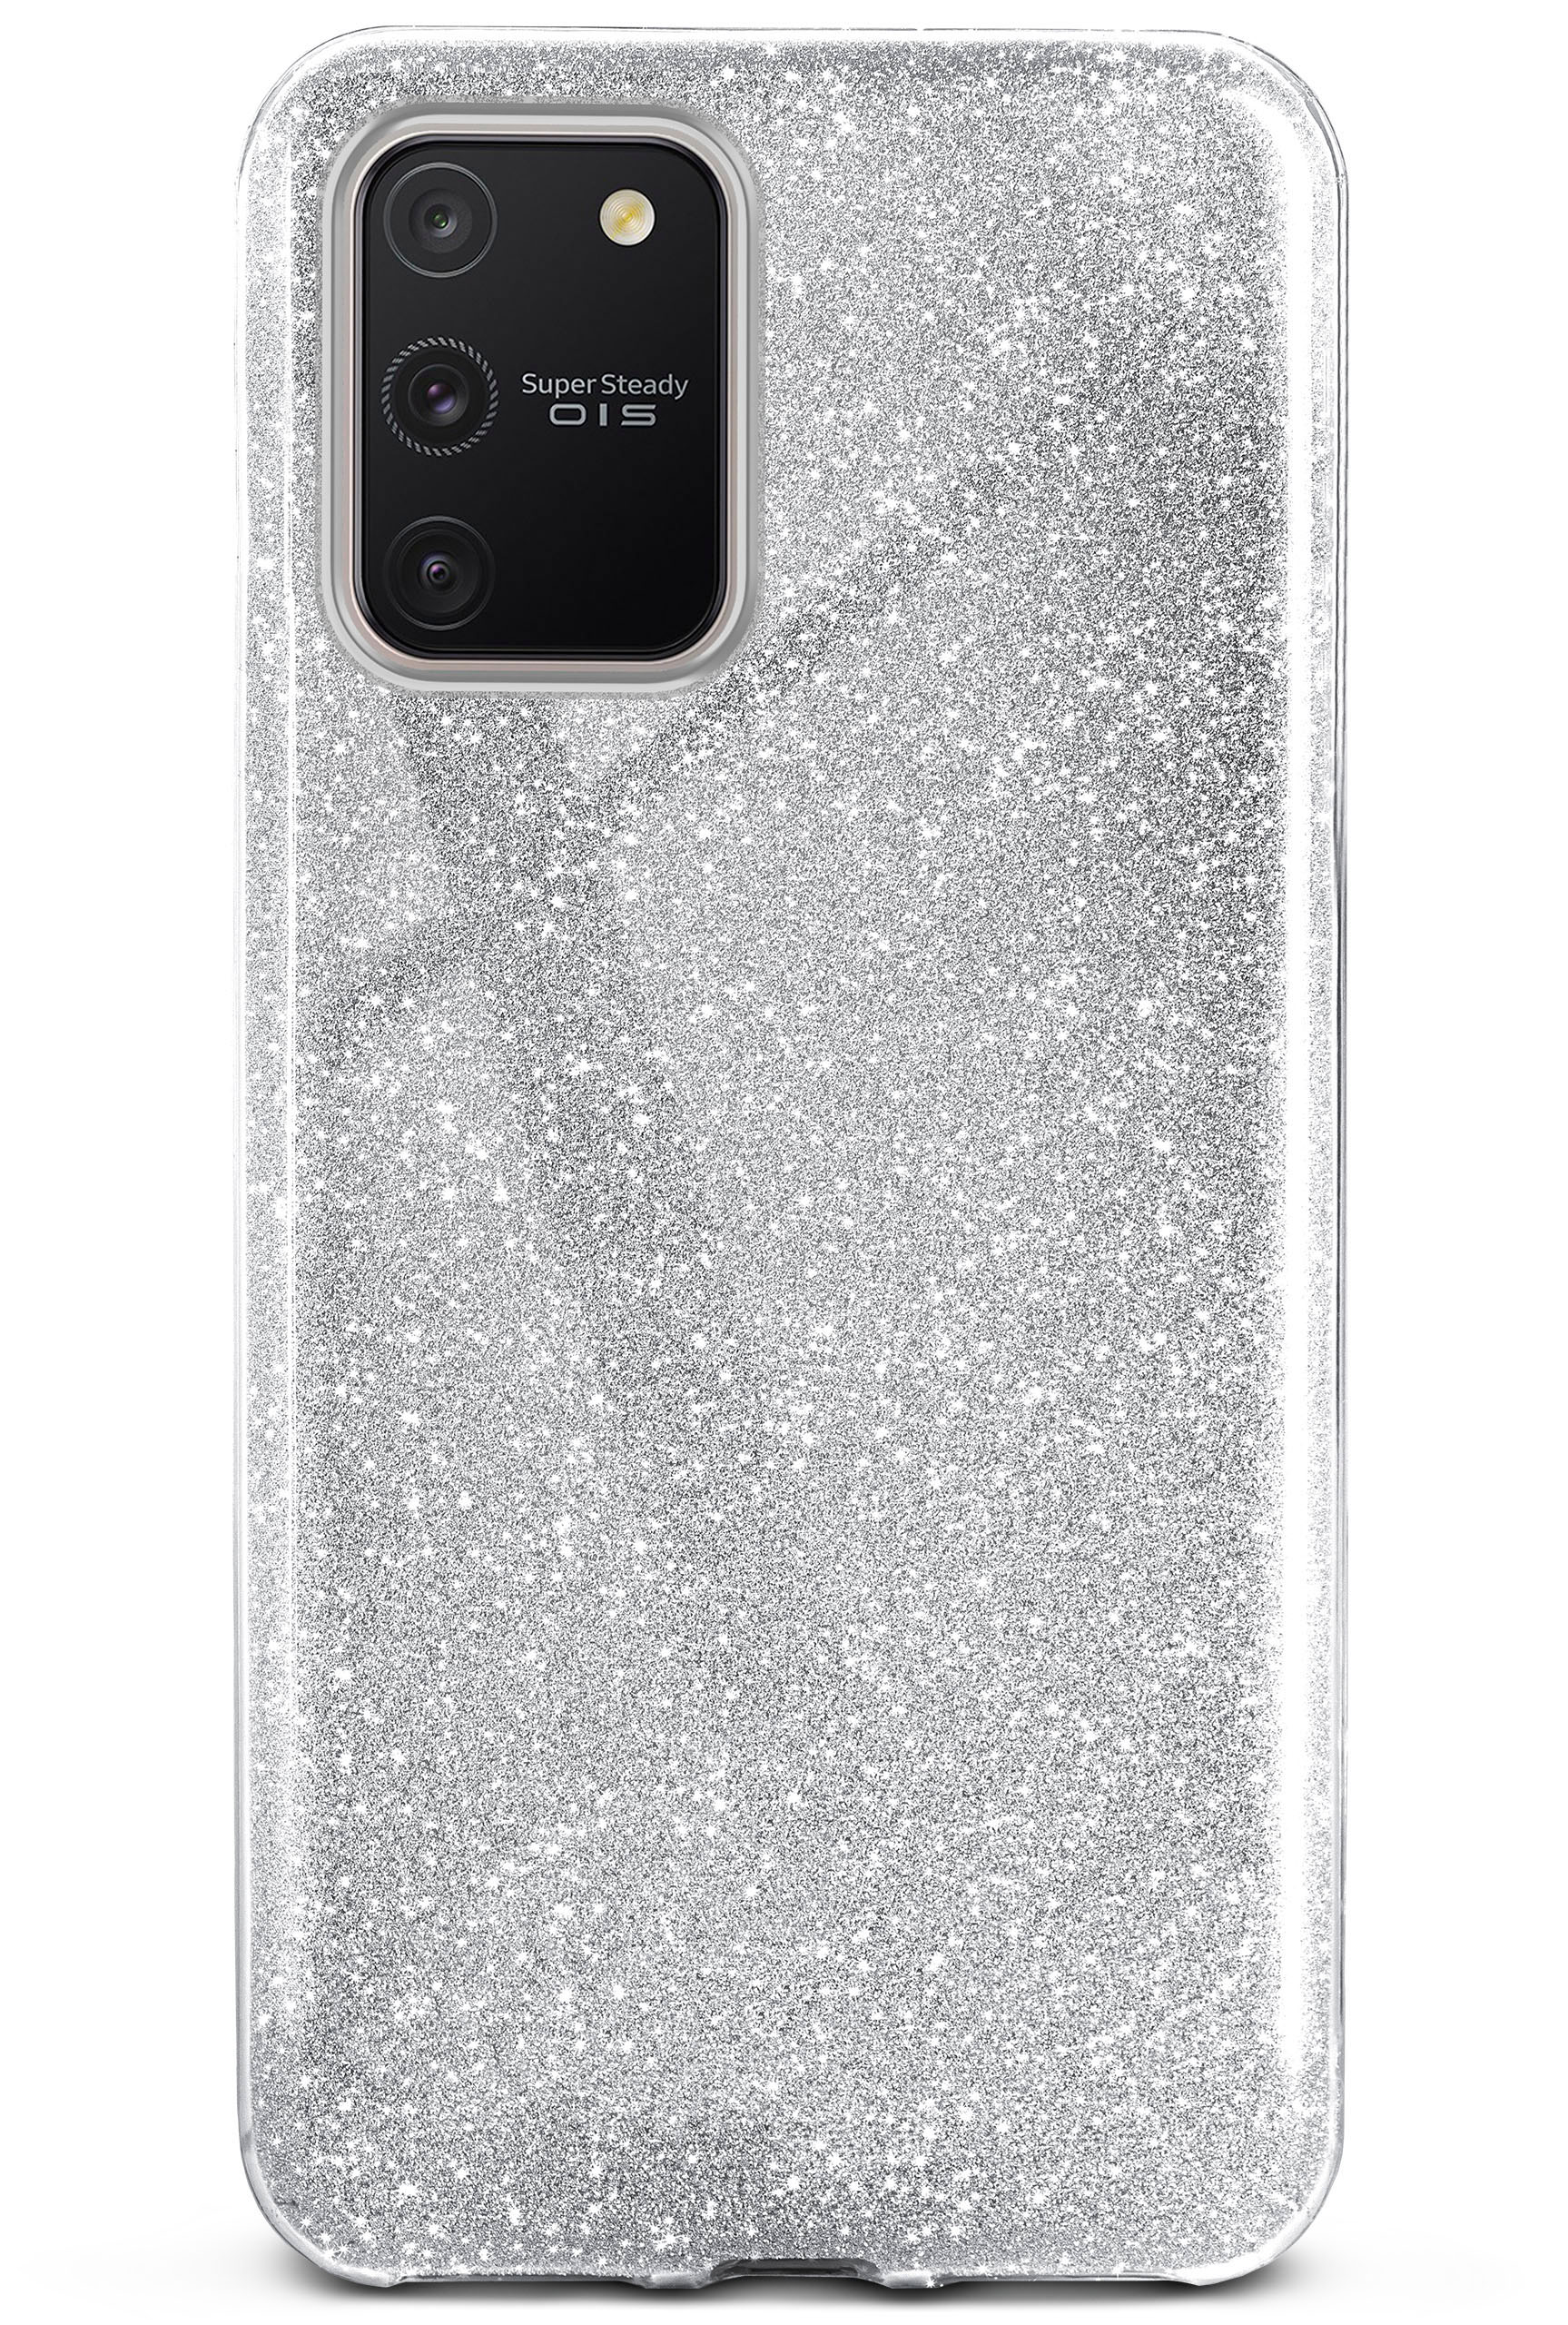 Silver Lite, Case, S10 Samsung, Backcover, ONEFLOW Galaxy Glitter Sparkle -